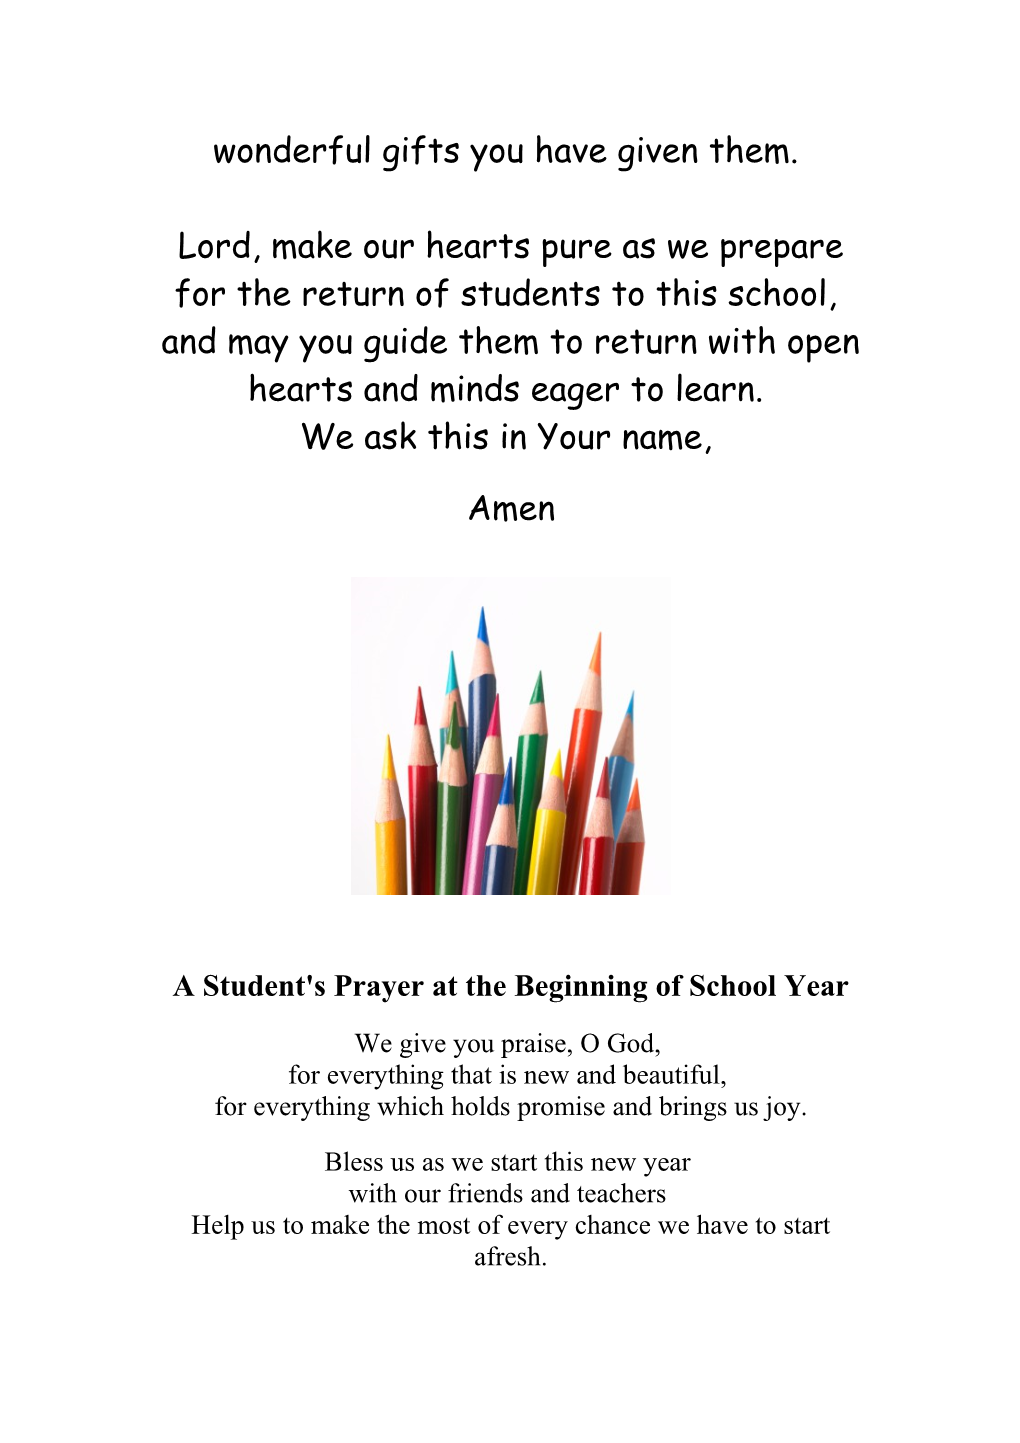 Back to School: Prayers for the Start of the School Year